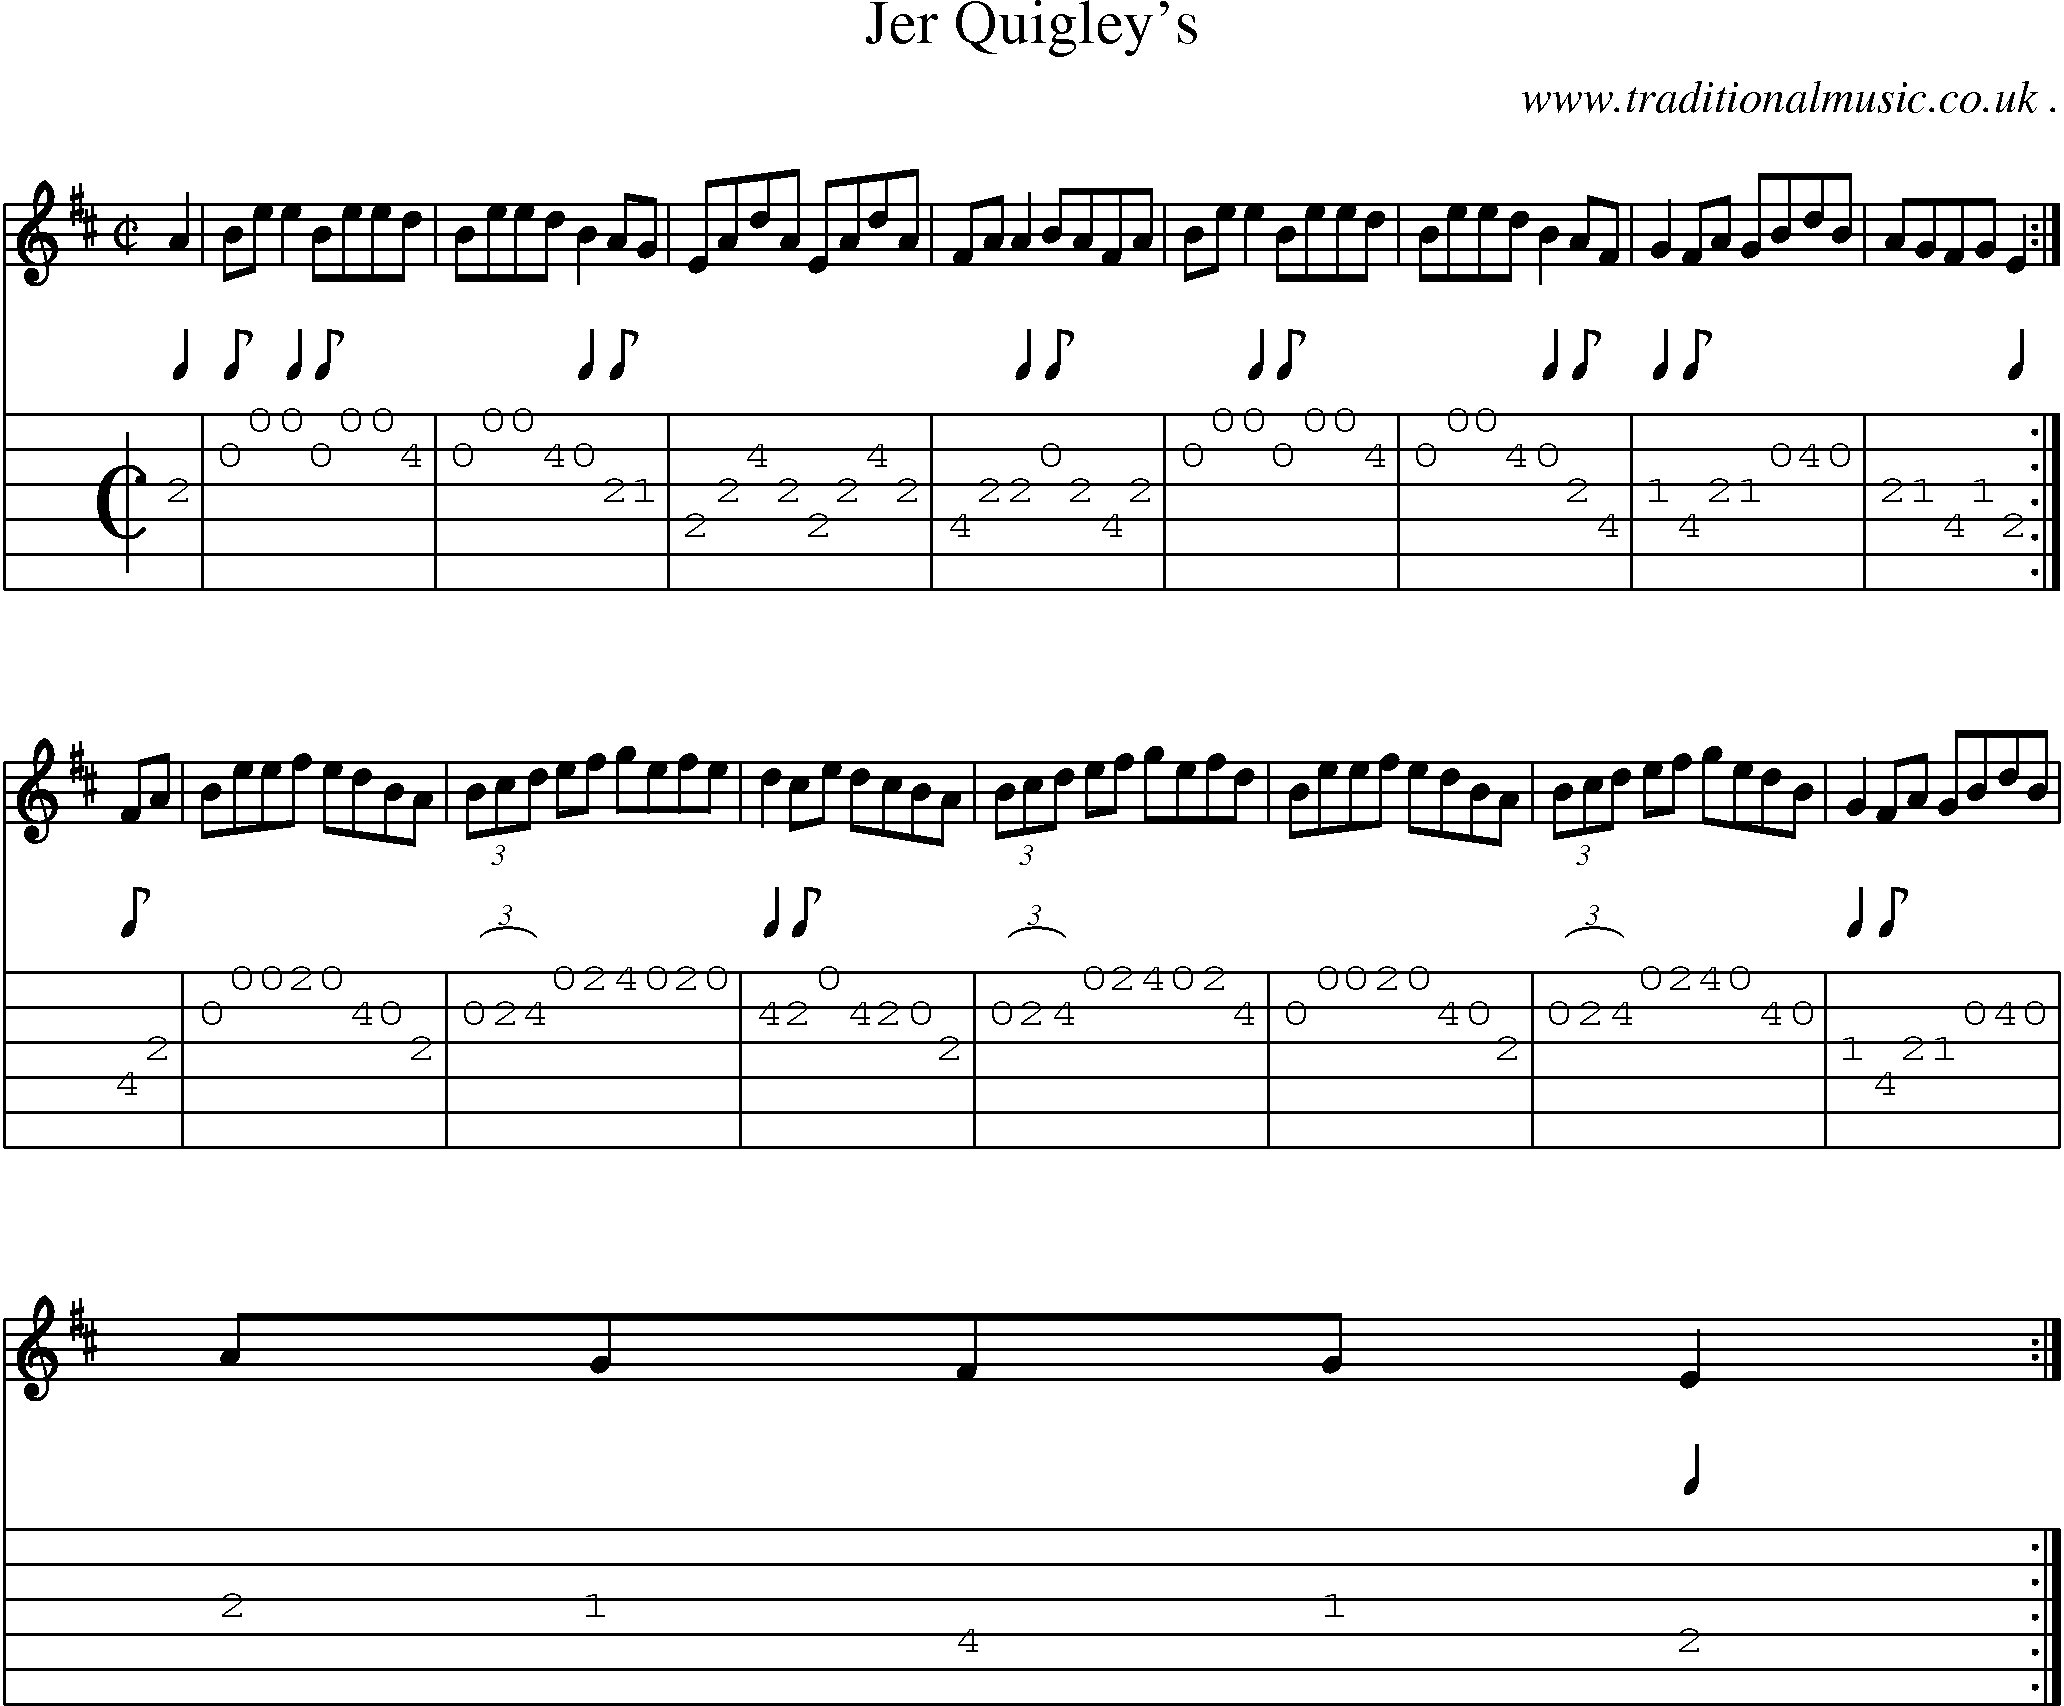 Sheet-Music and Guitar Tabs for Jer Quigleys